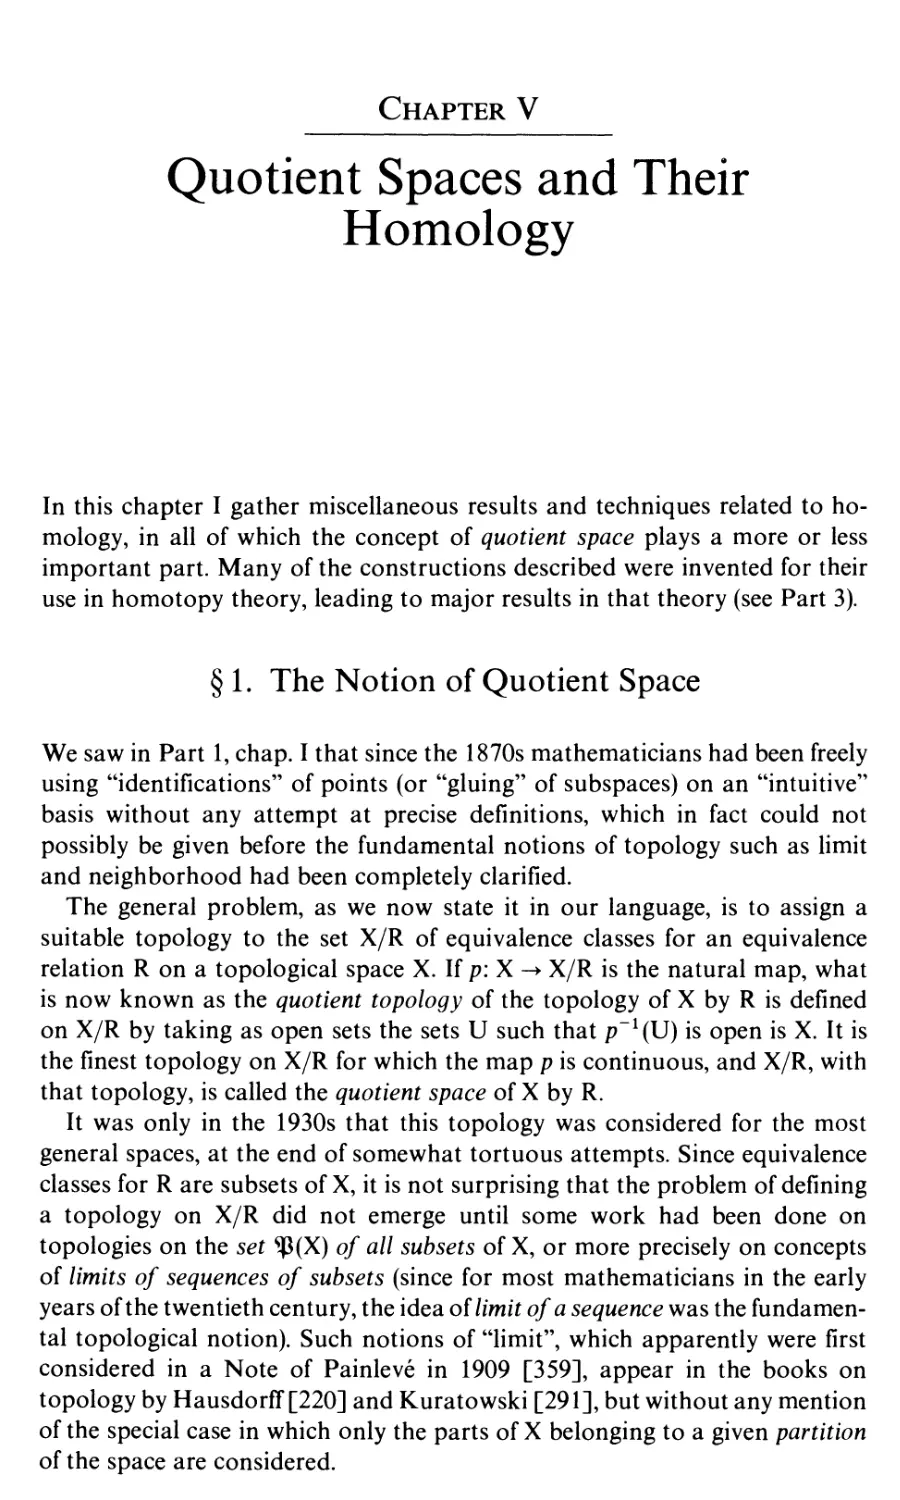 Chapter V. Quotient Spaces and Their Homology